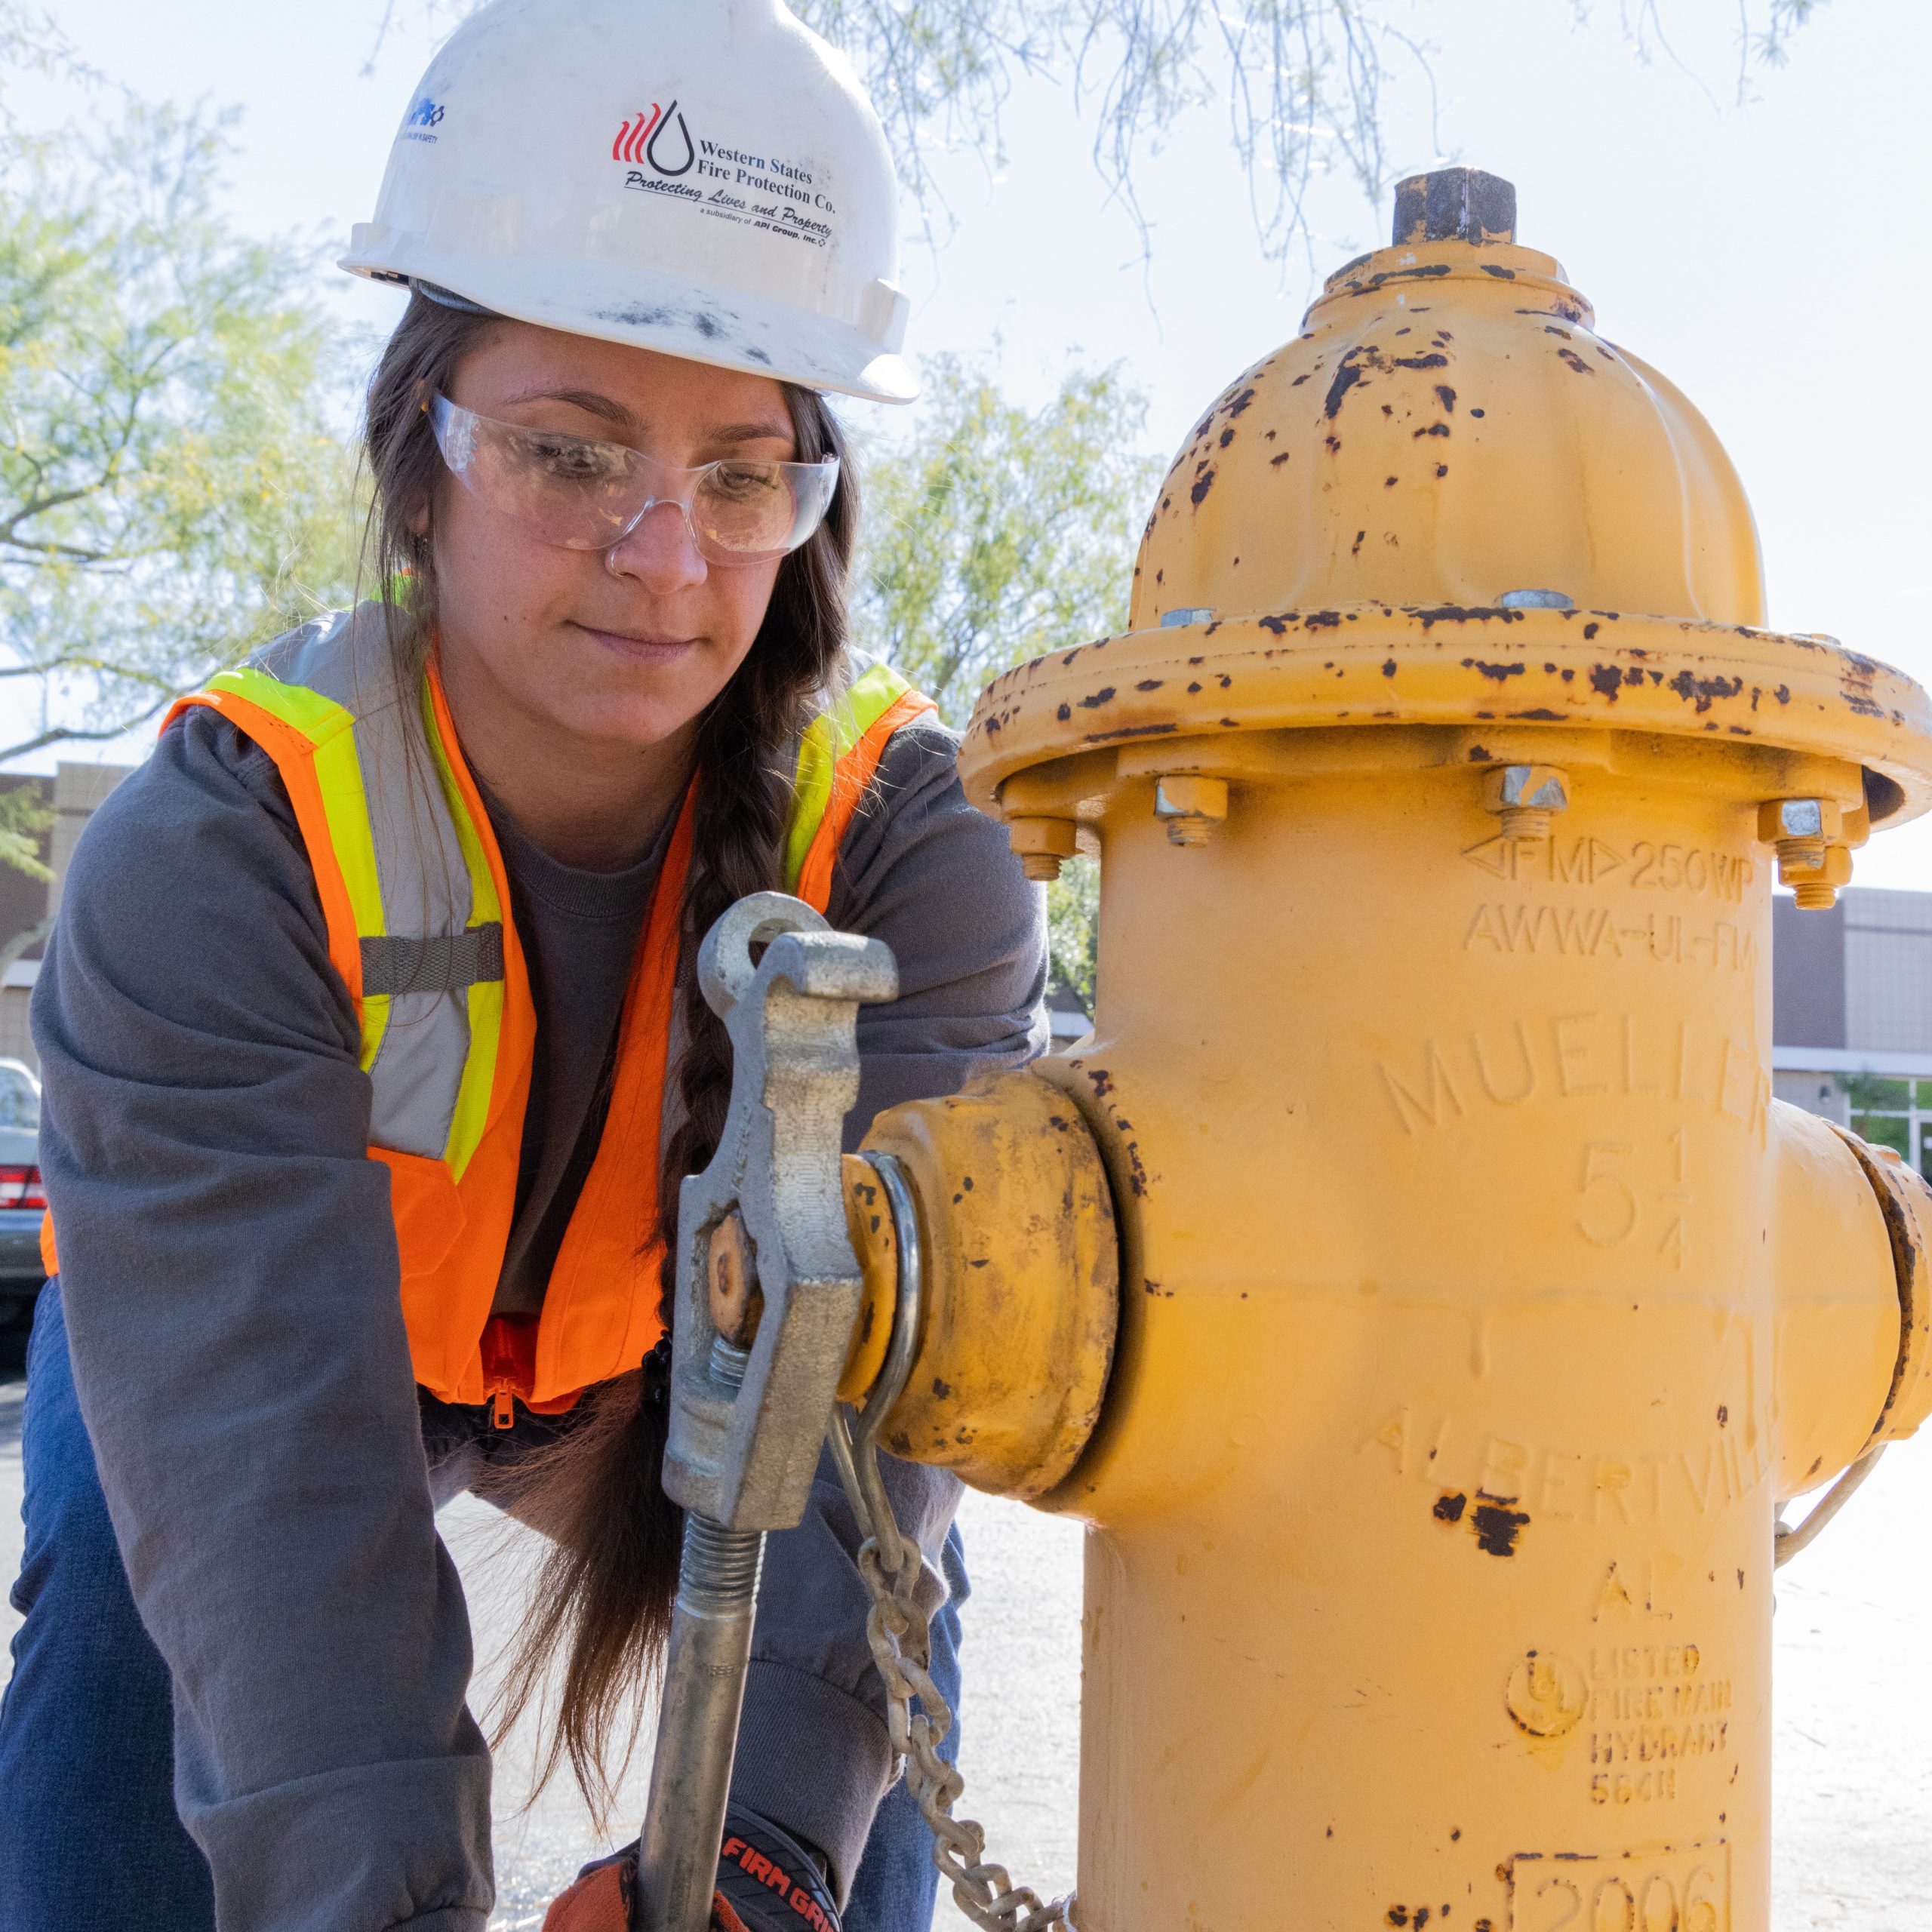 Types of Fire Hydrants & Inspection Requirements